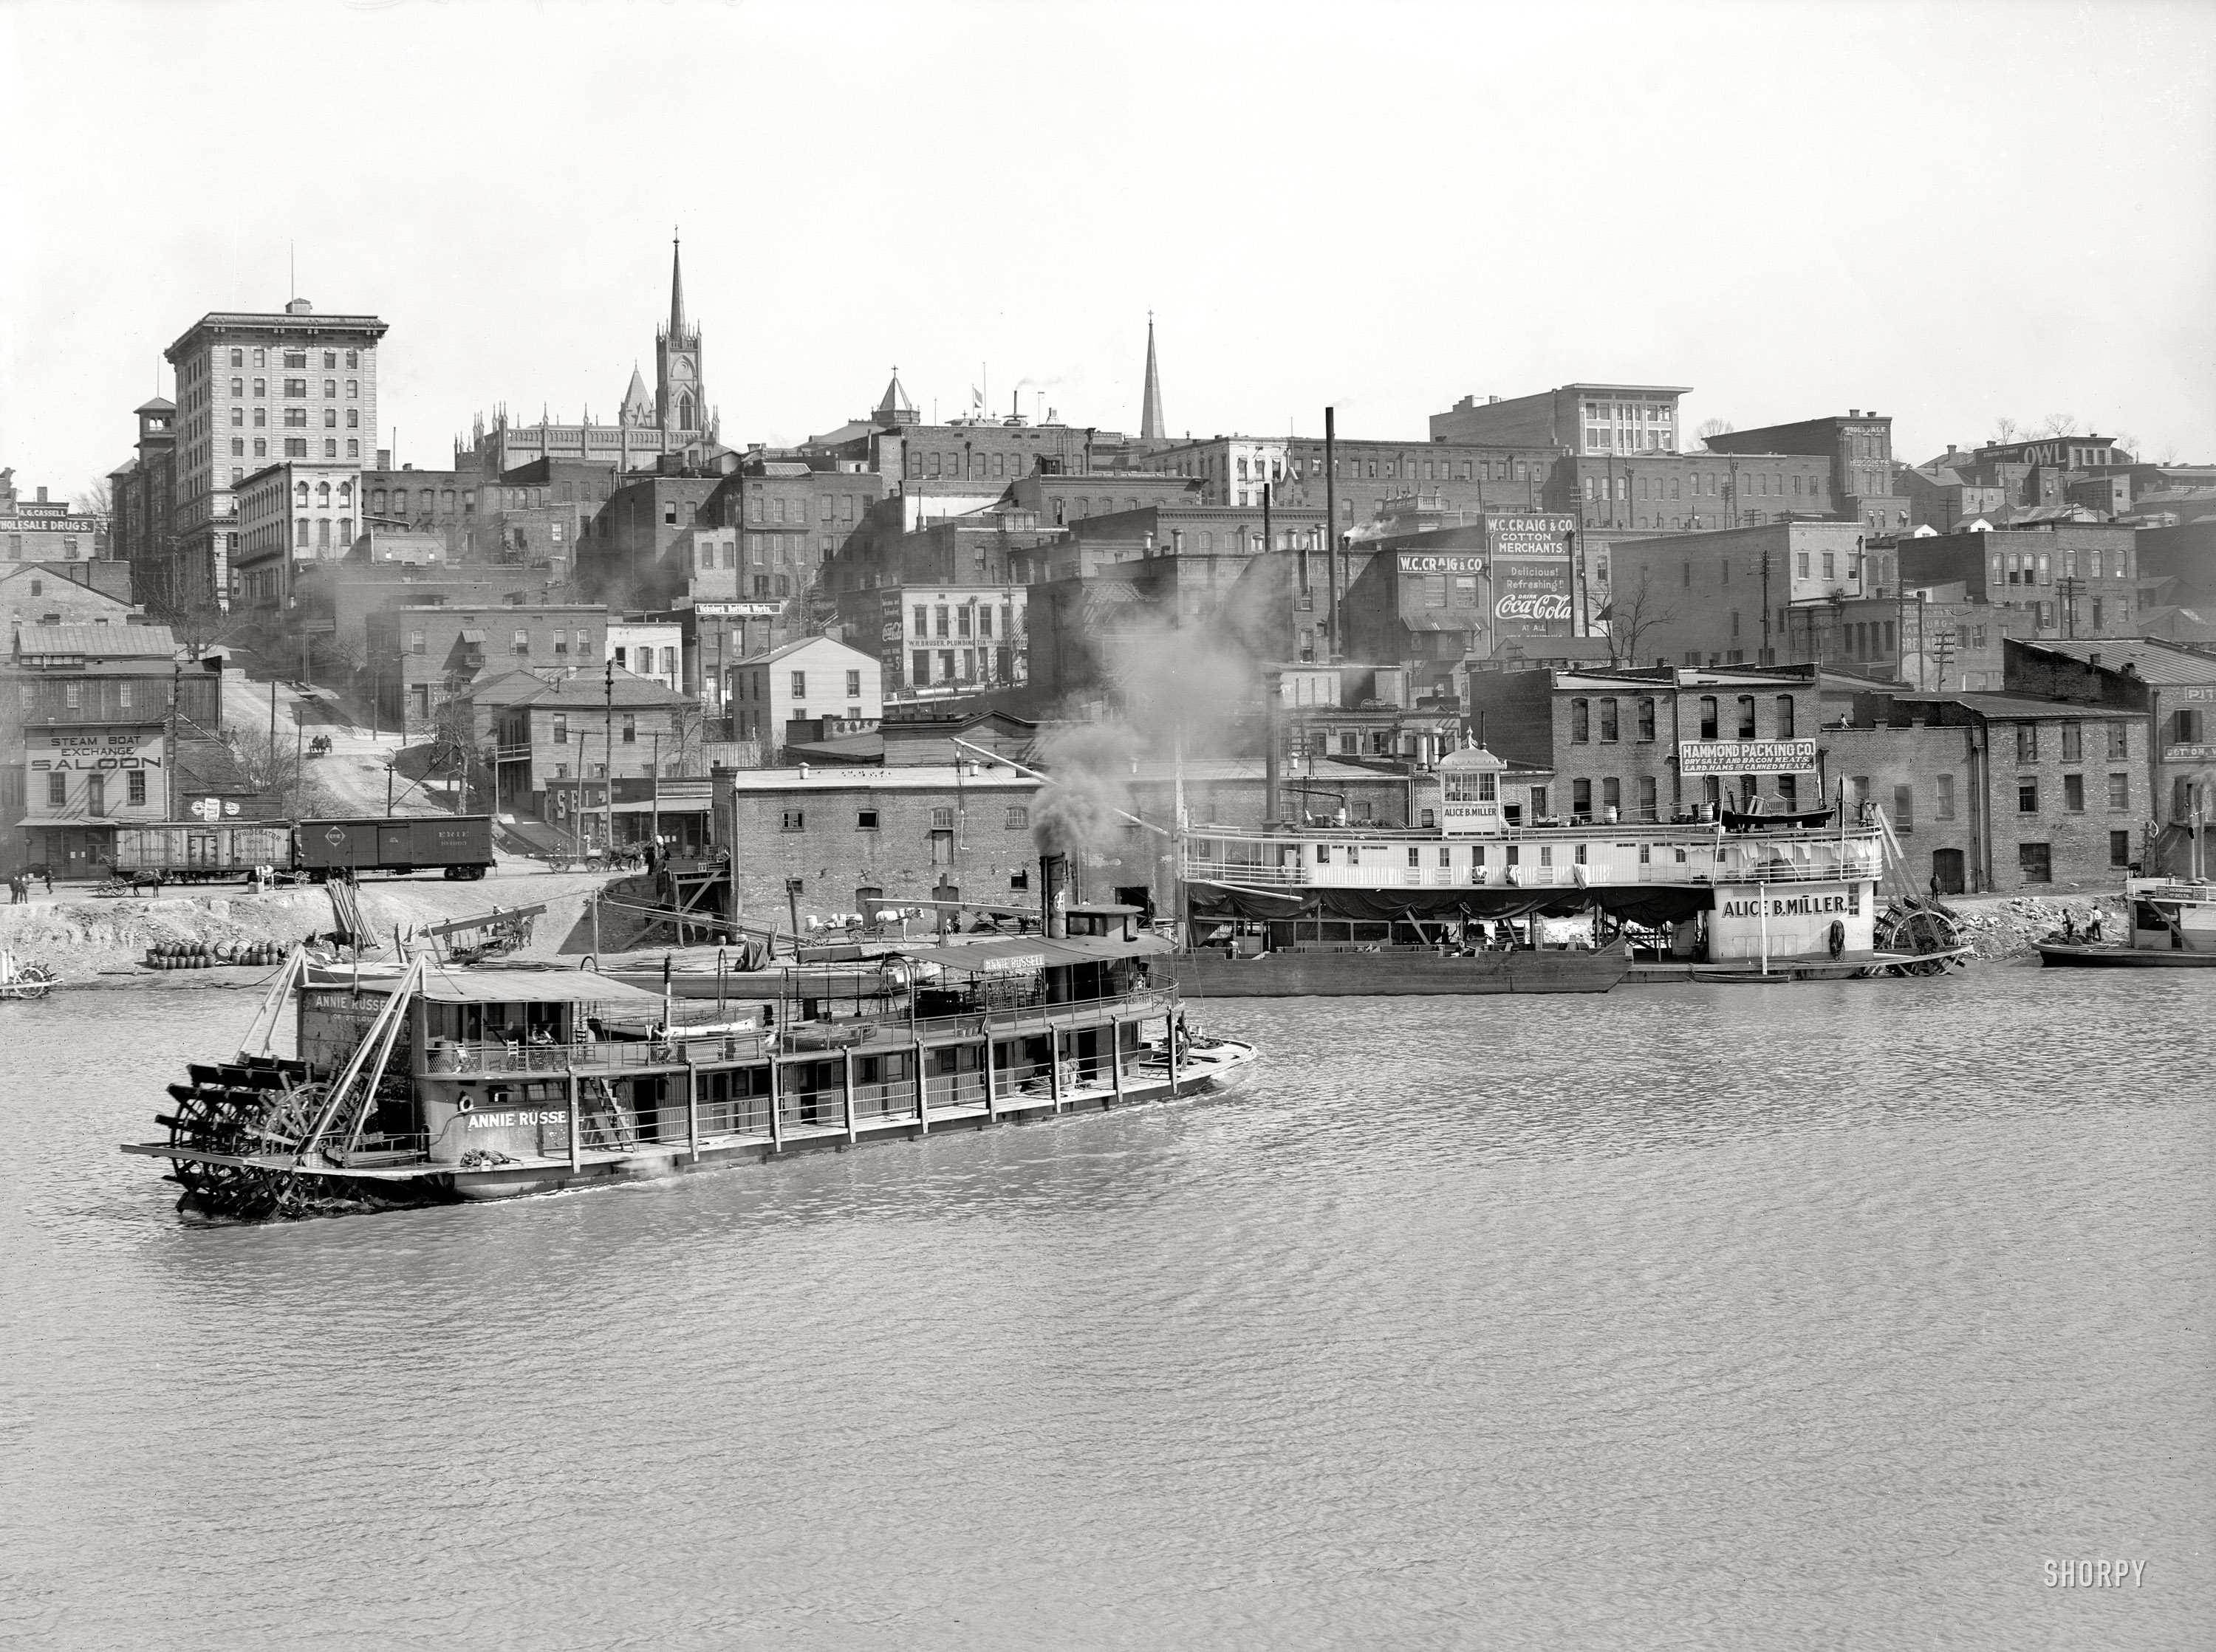 The Mississippi River circa 1909. "Vicksburg waterfront." The sternwheelers Annie Russell and Alice B. Miller. Detroit Publishing Co. View full size.